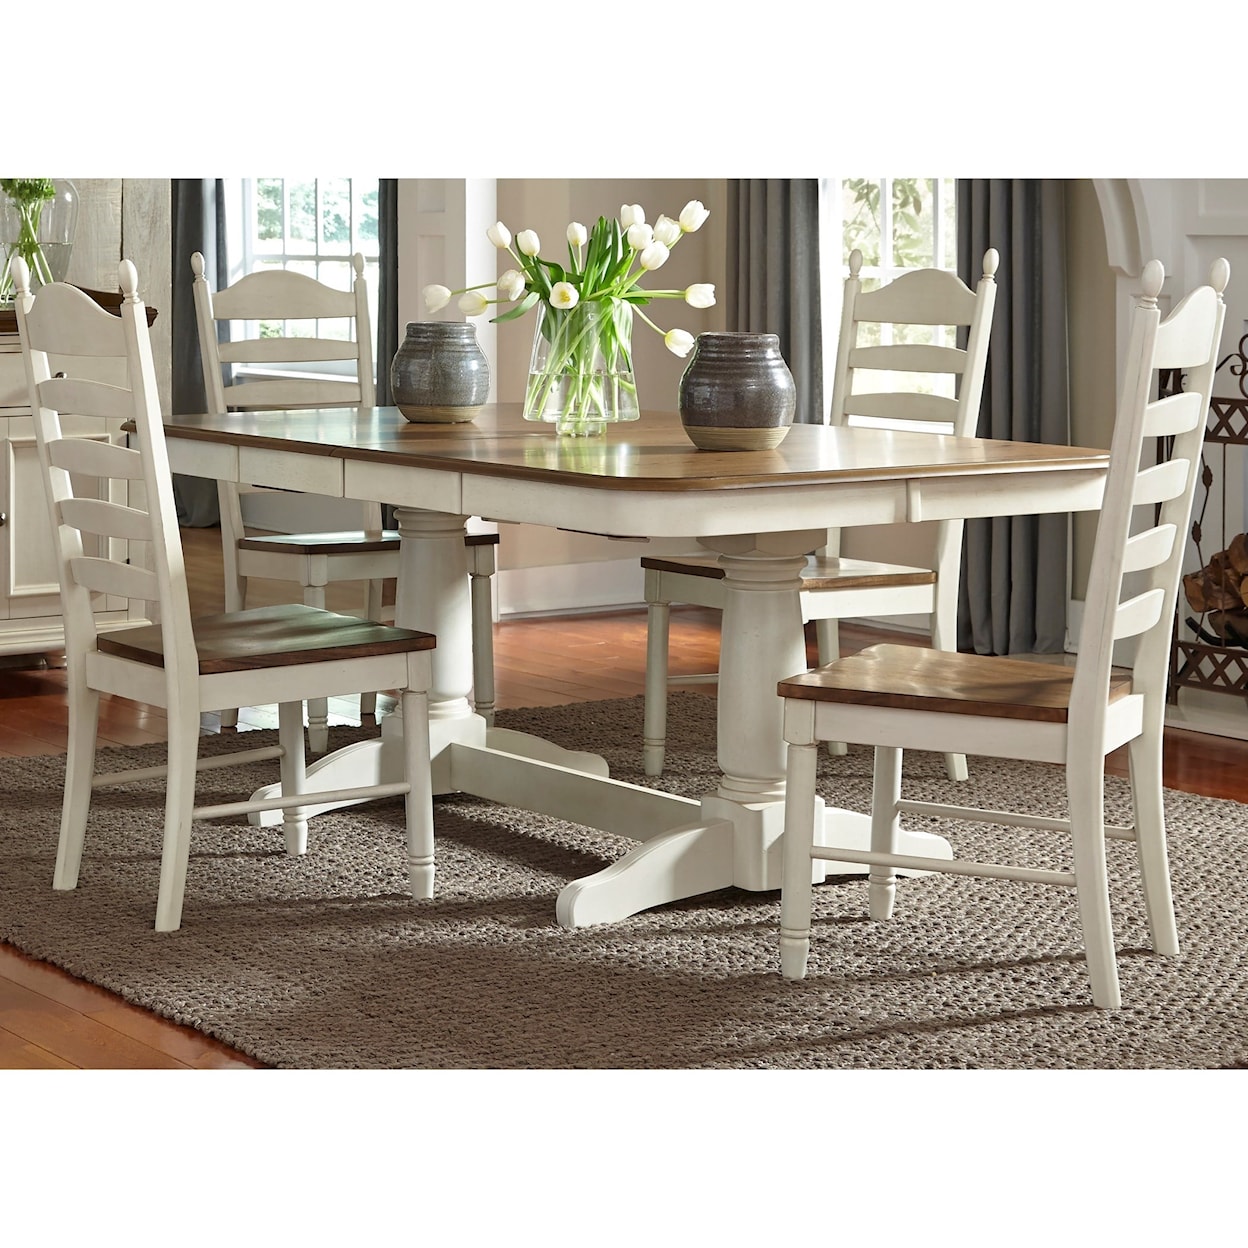 Liberty Furniture Springfield Dining 5-Piece Trestle Table Dining Set